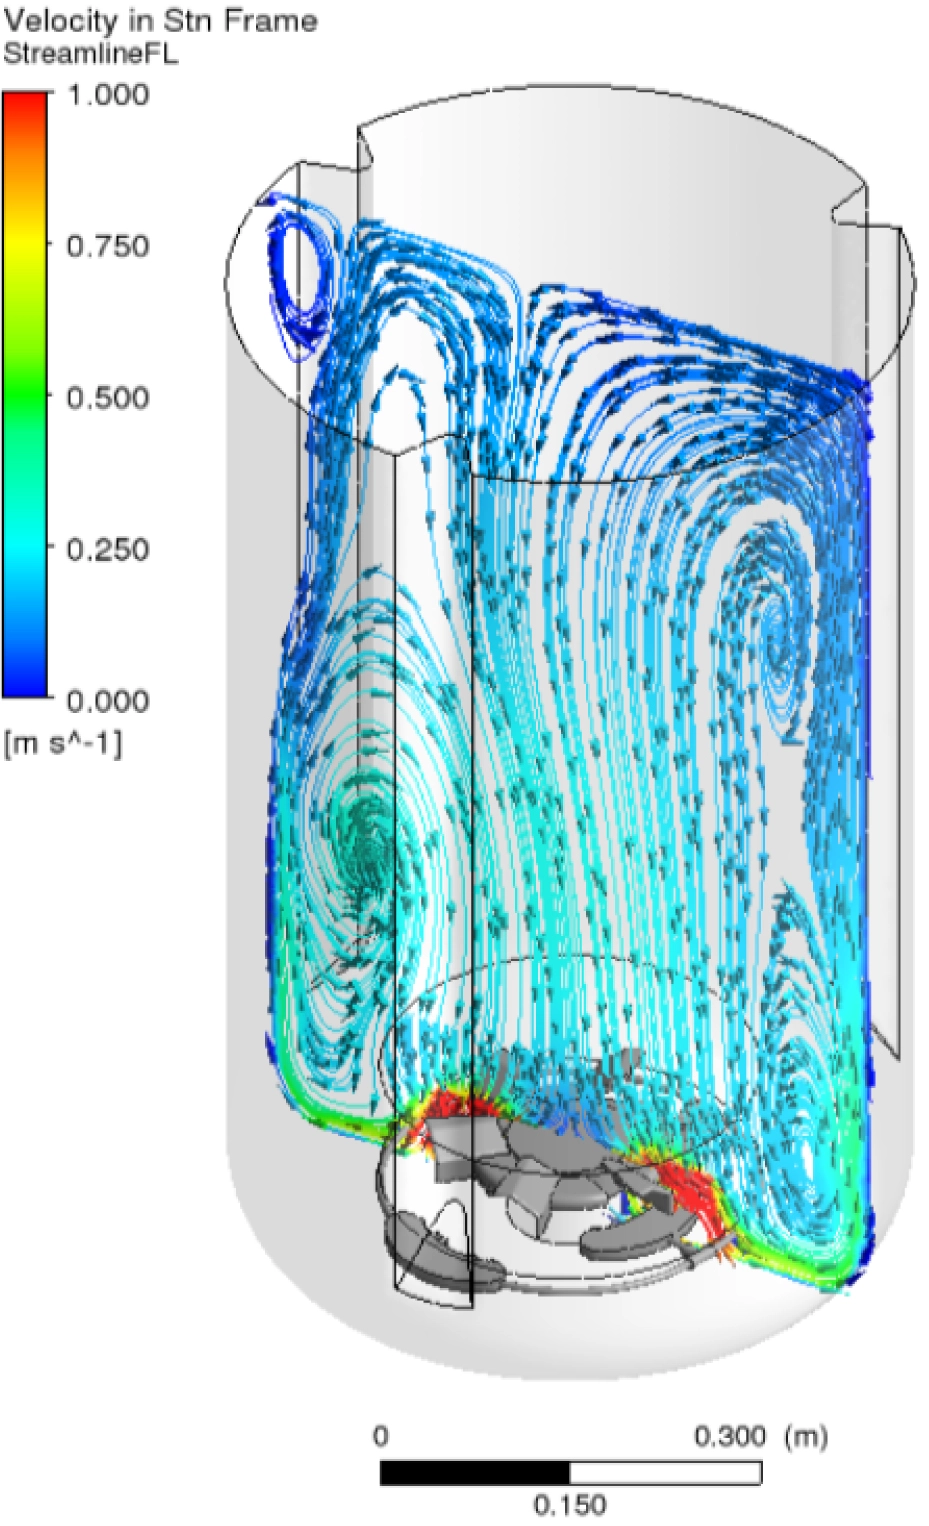 CFD model for shear rate analysis